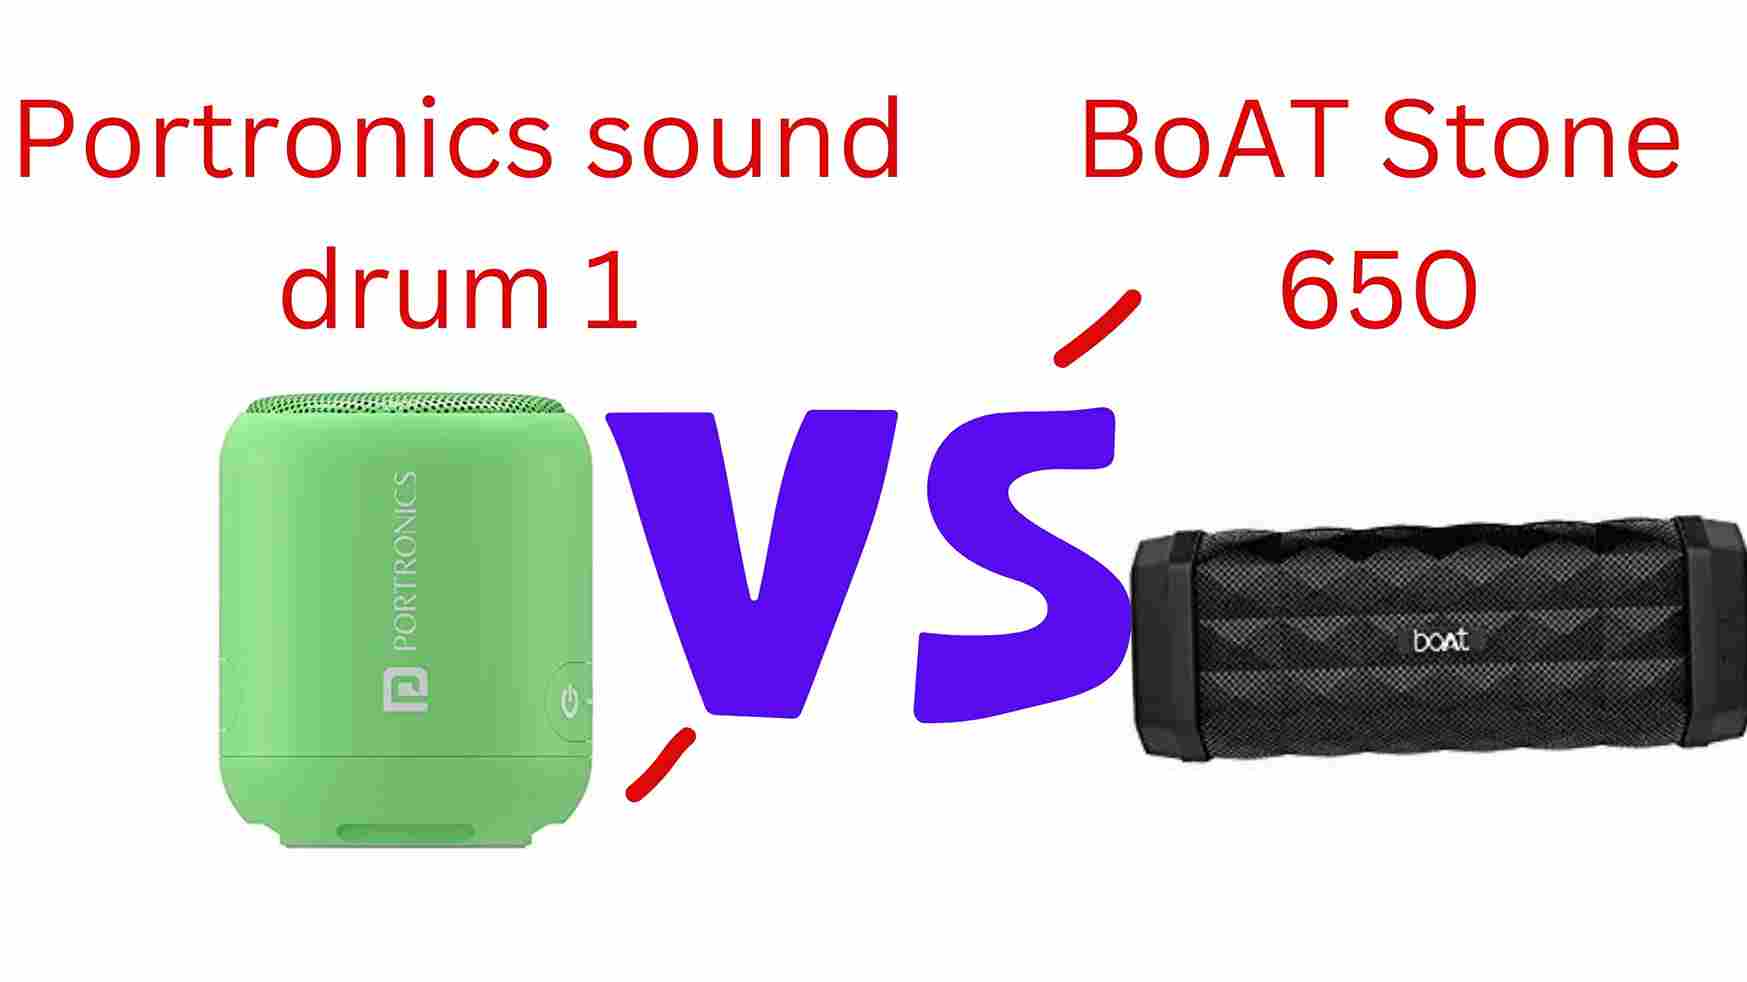 Boat Stone 650 vs Portronics Sound Drum 1 Which is Better?